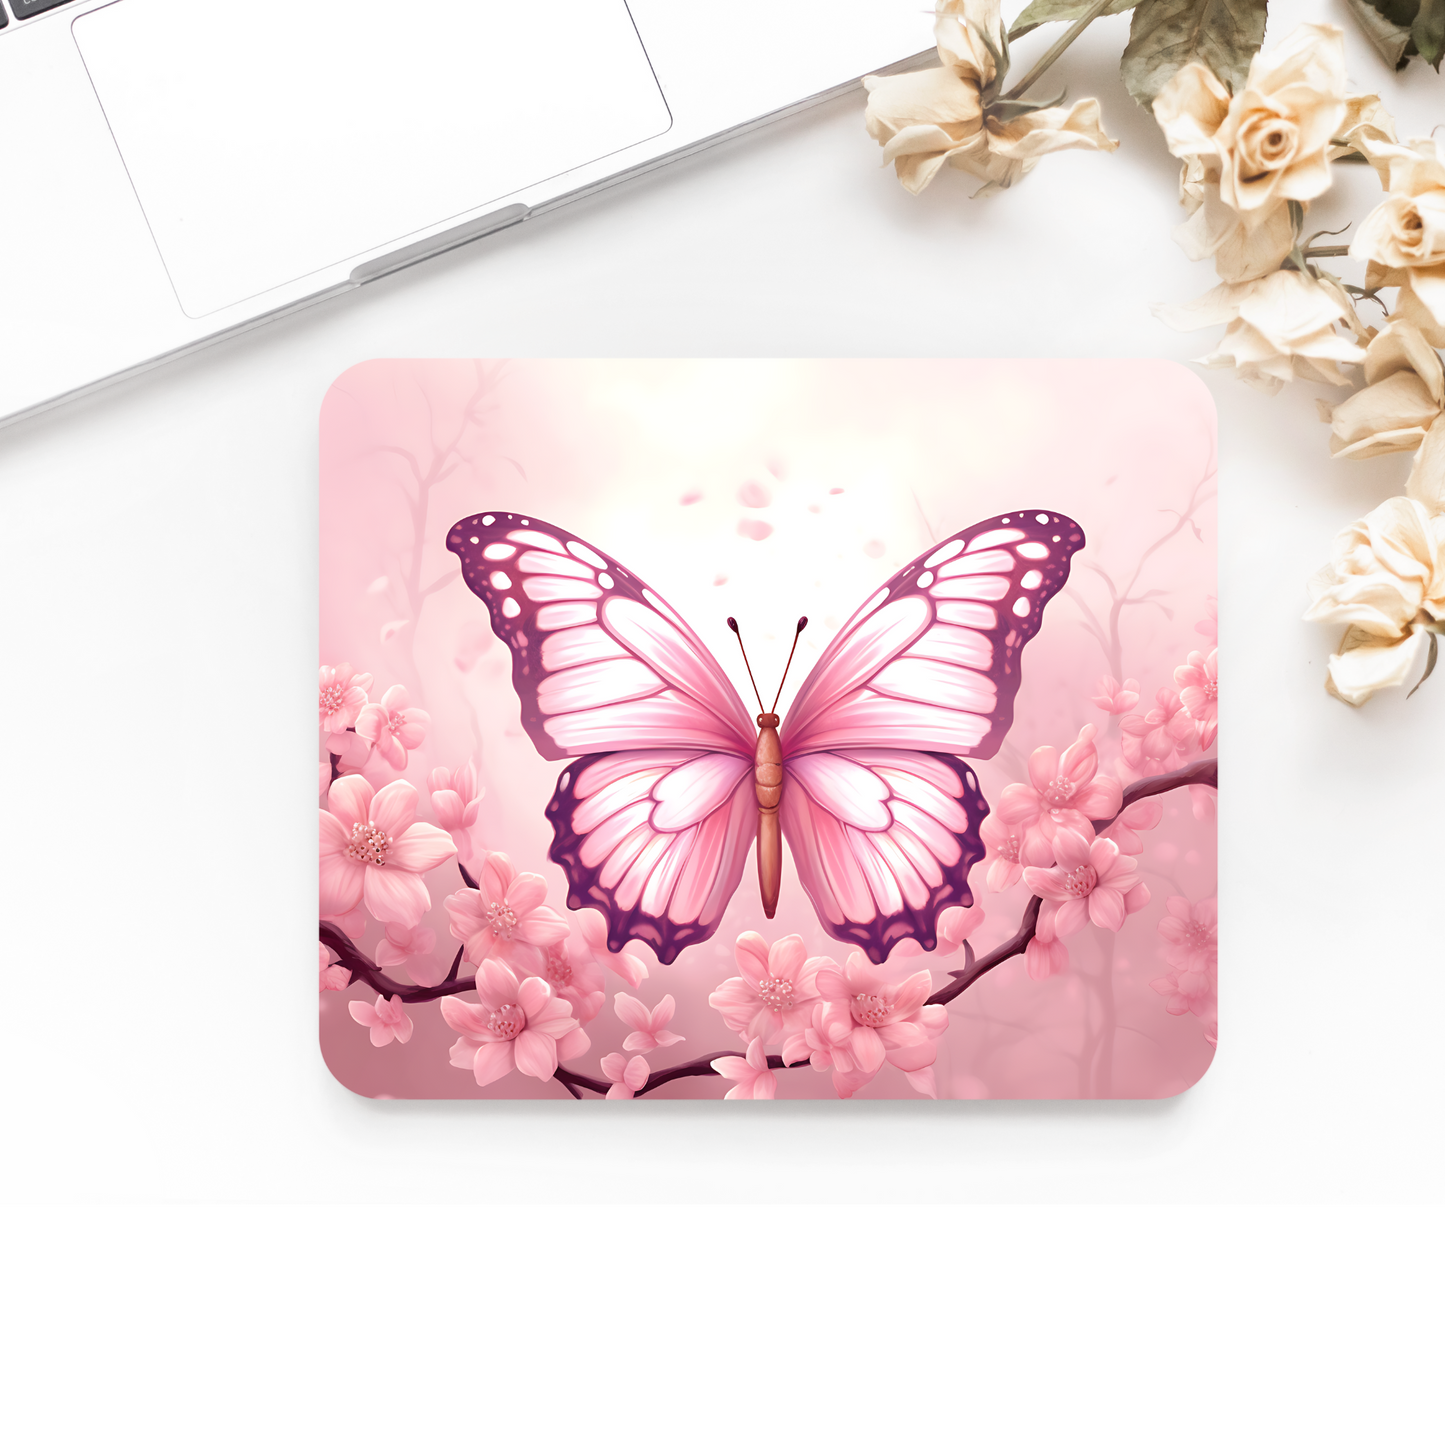 Premium Printed Anti-Slip Mouse Mat - Ultra Durable Pink Butterfly Design